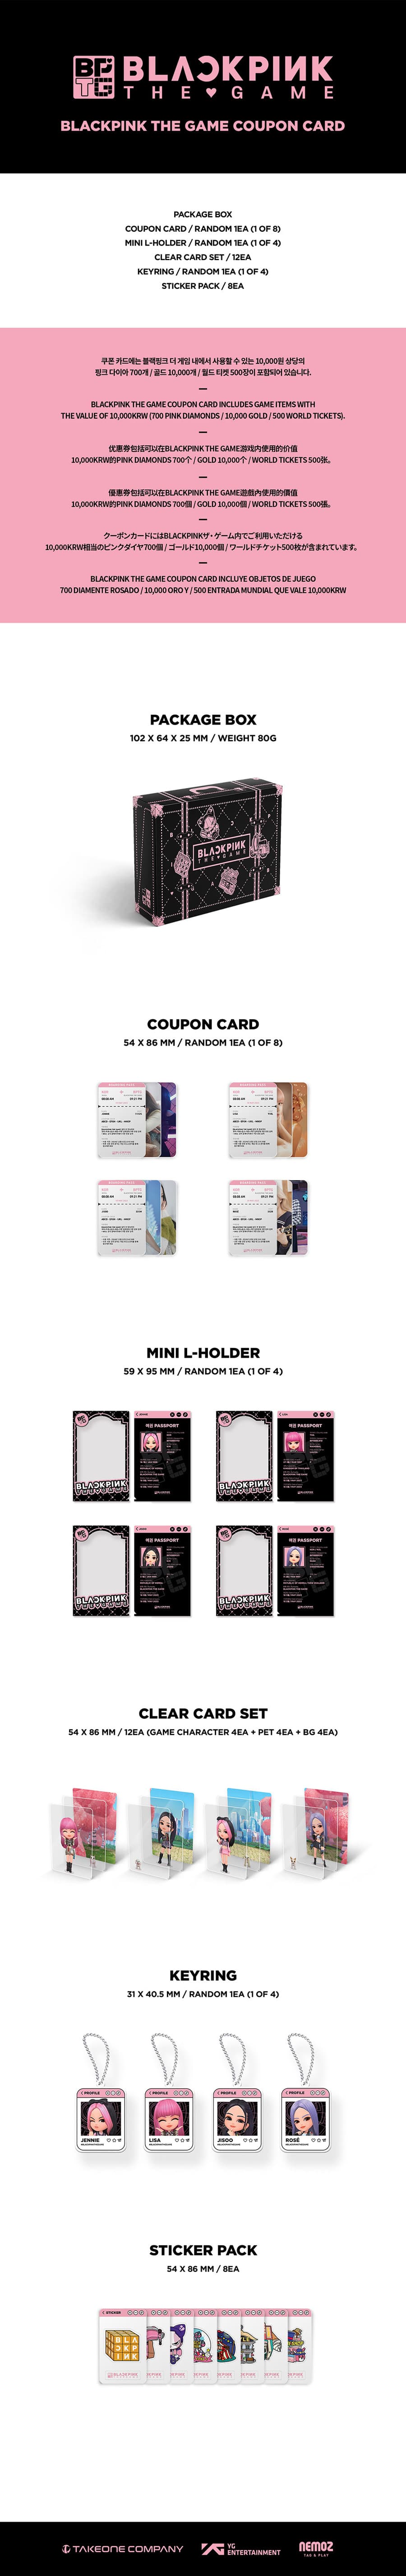 blackpink-the-game-coupon-card-wholesale